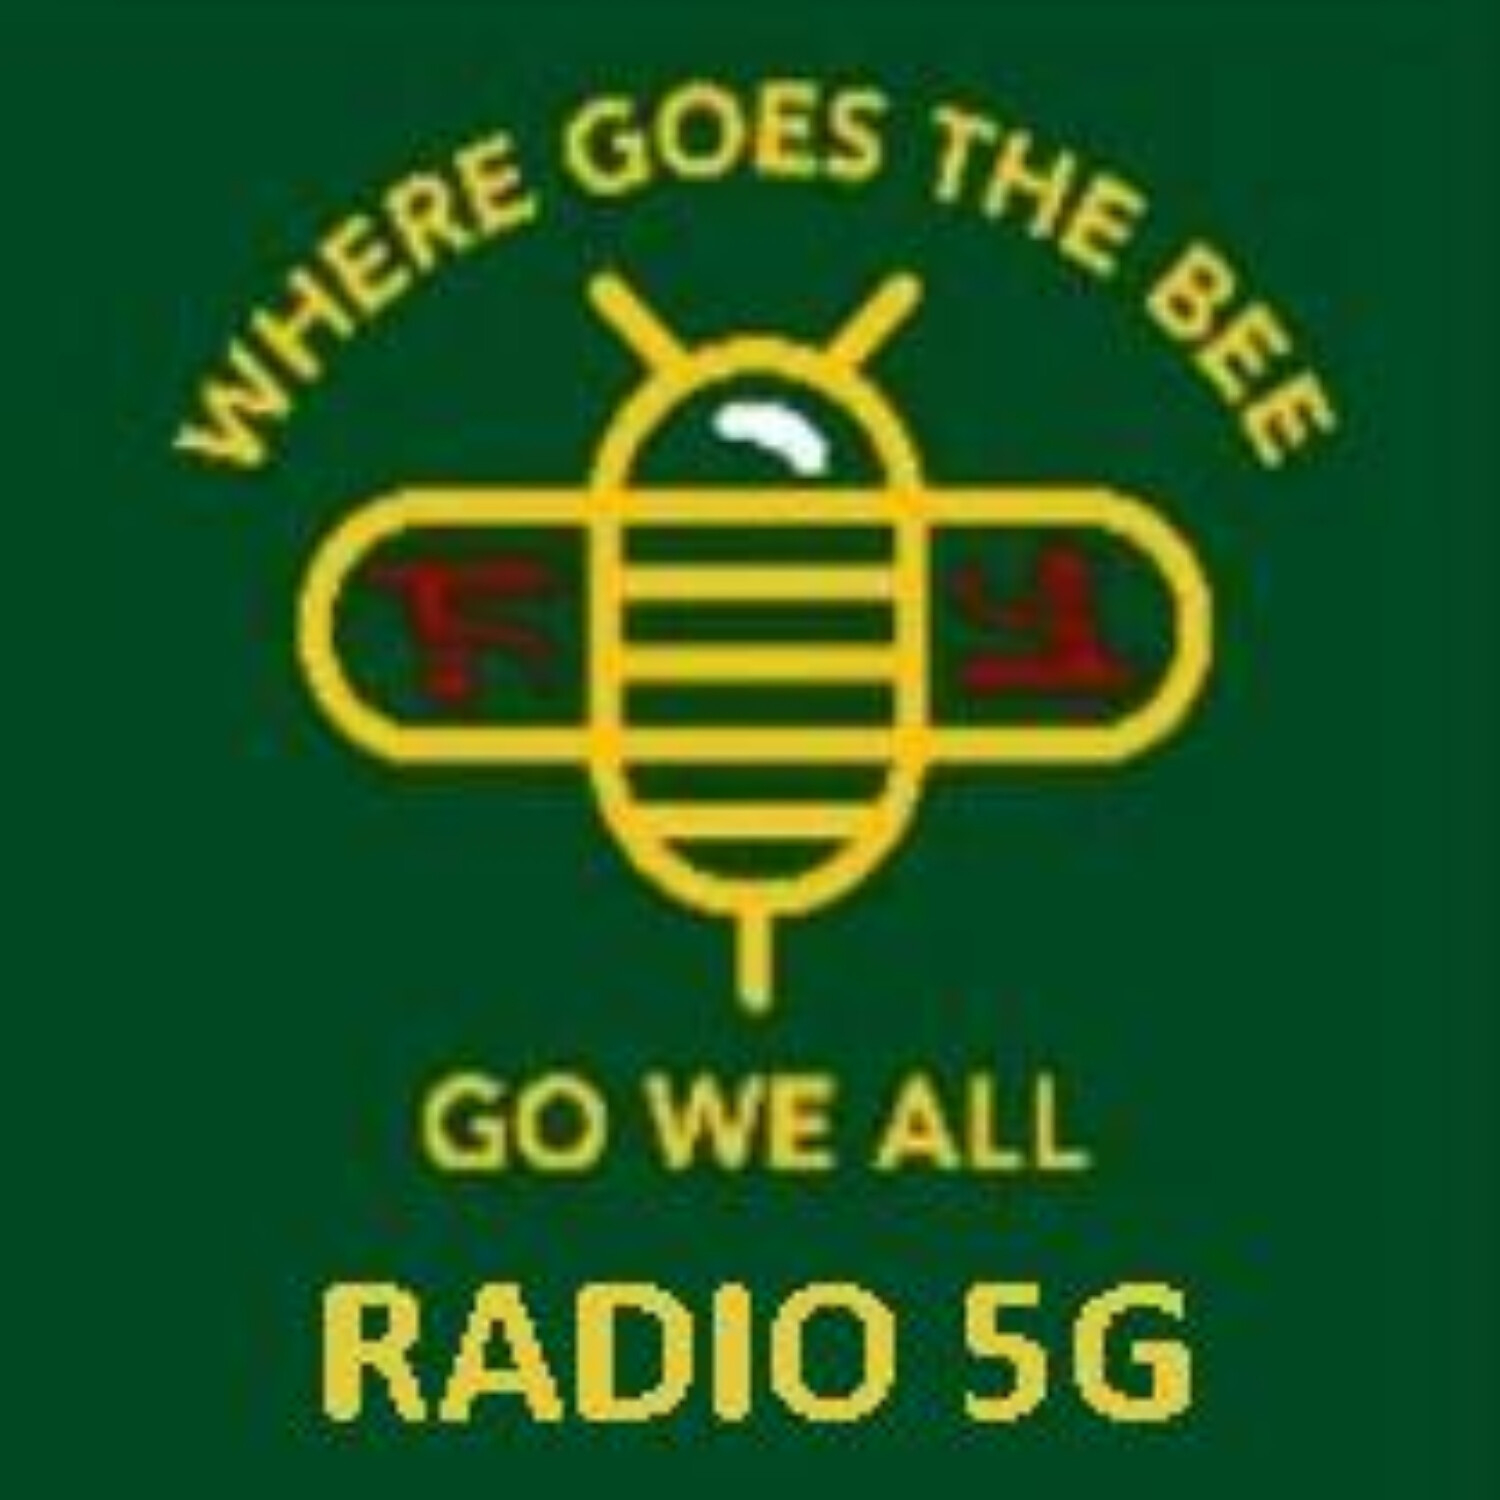 “RADIO 5G” 7/27/22 - Climate Swindle the Same Old Book